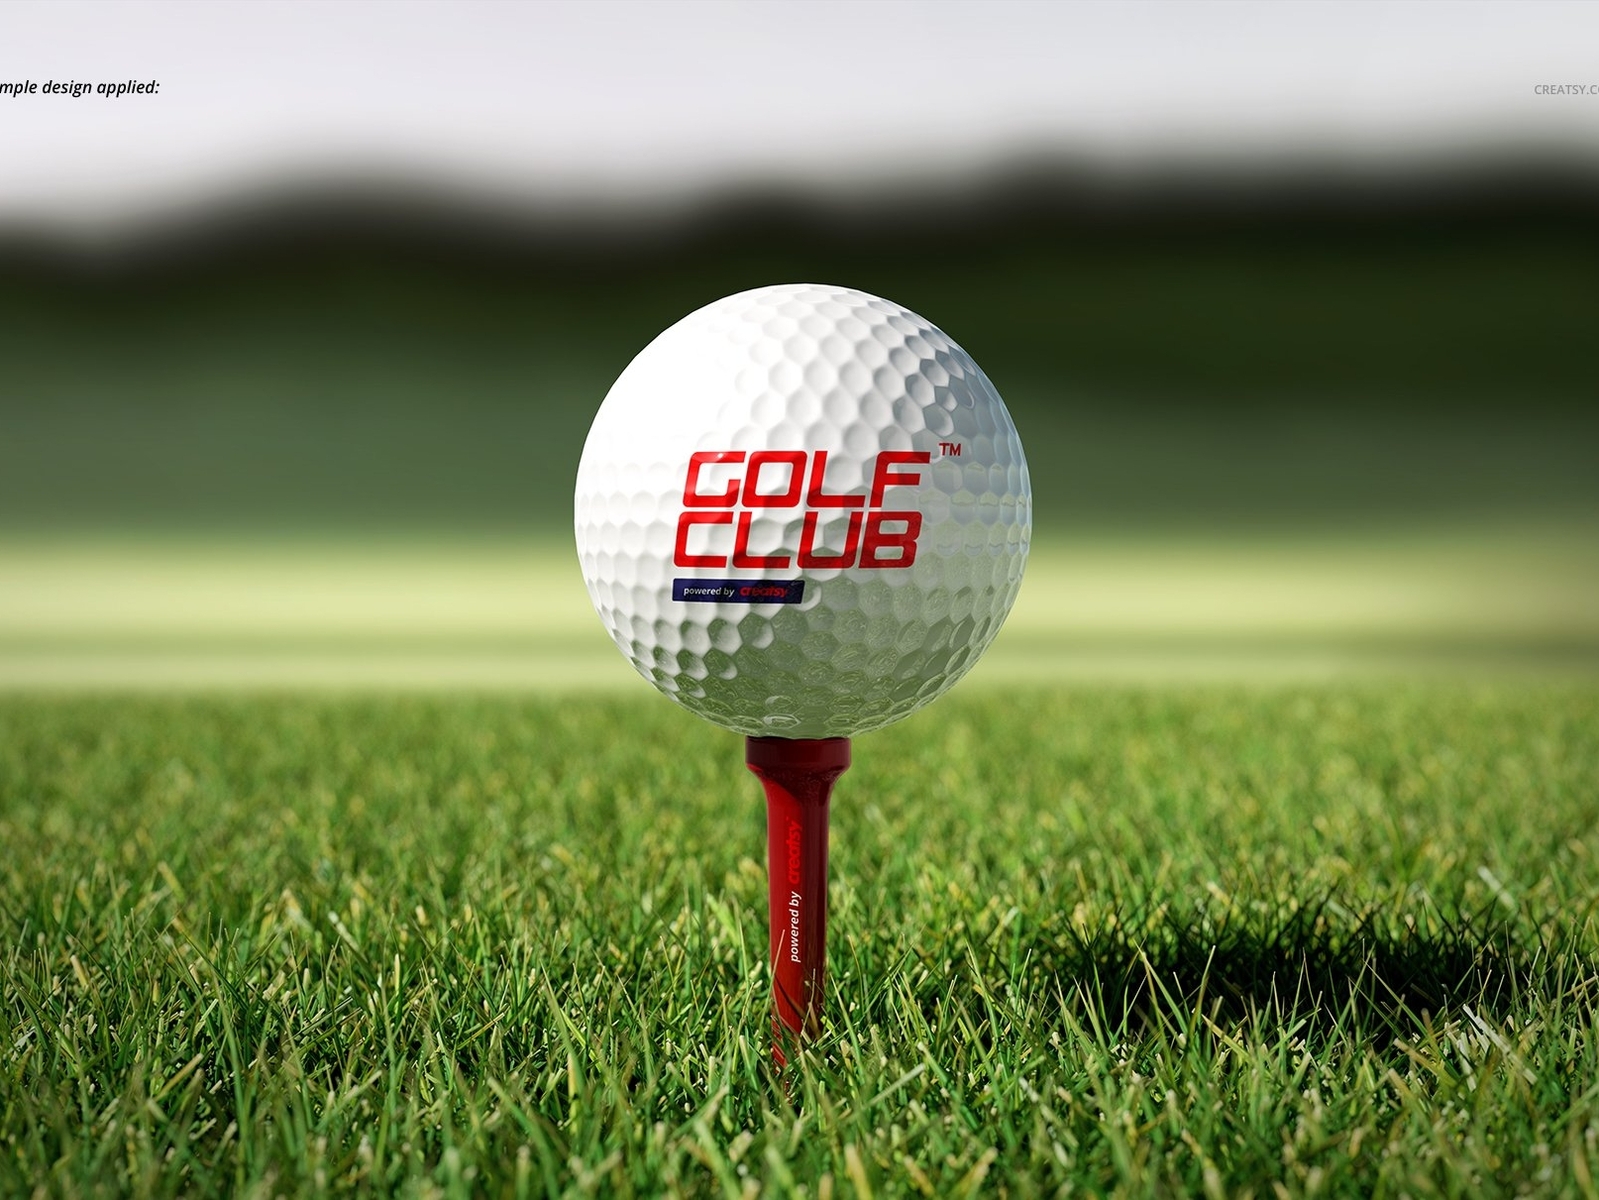 Download Golf Ball & Accessories Mockup Set by Mockup5 on Dribbble